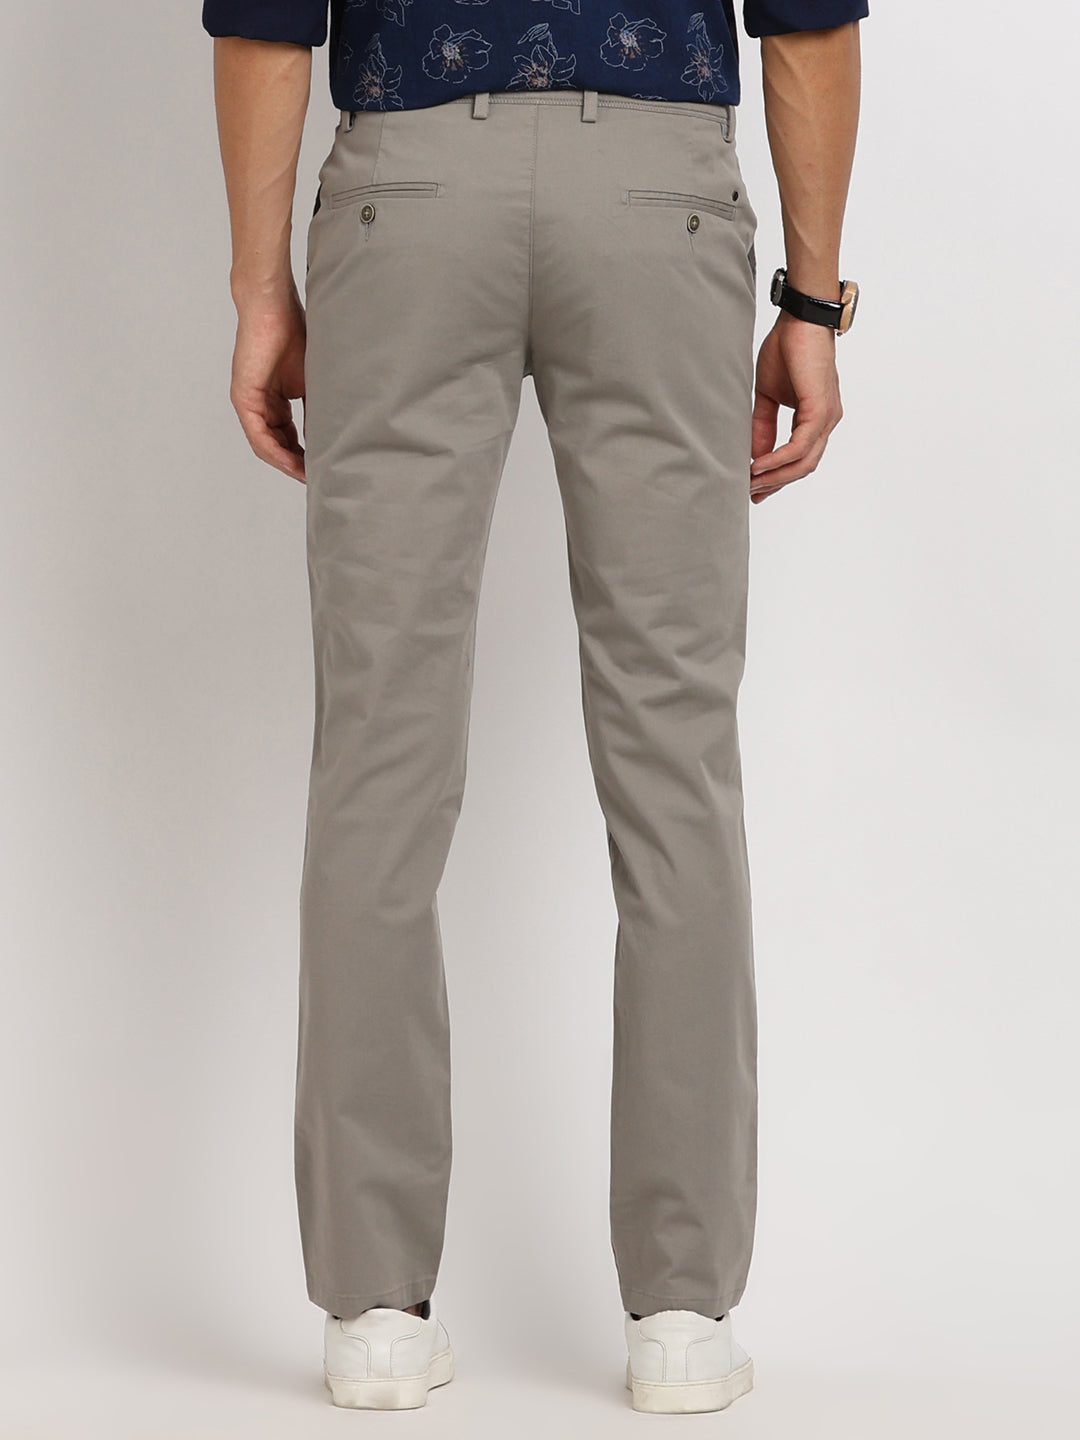 Cotton Stretch Light Grey Plain Ultra Slim Fit Flat Front Casual Trouser